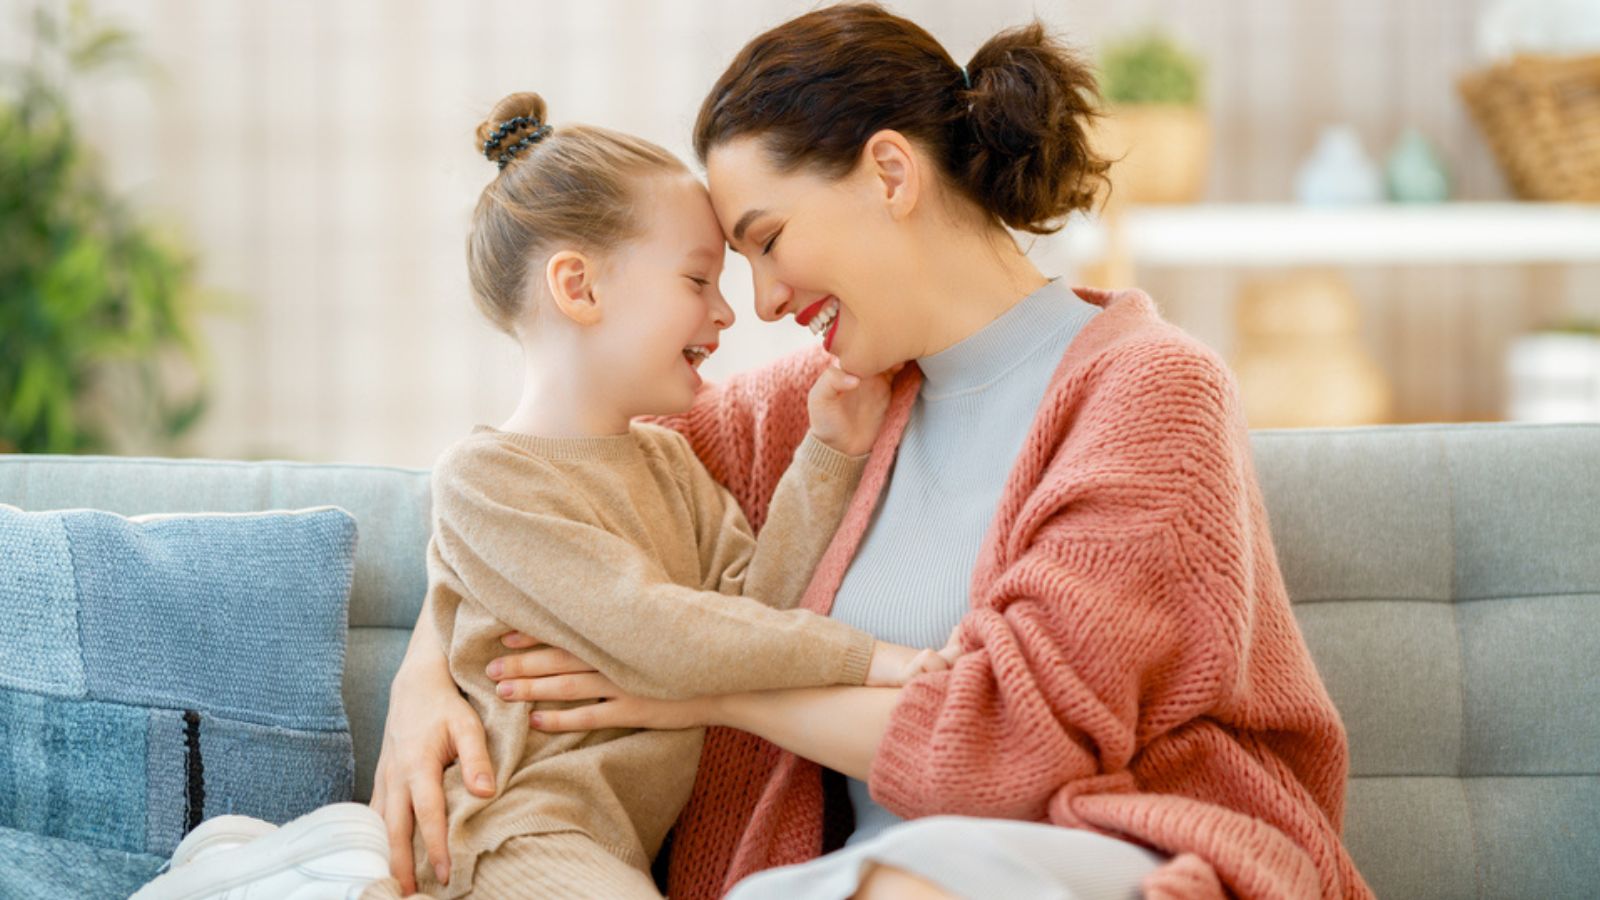 Mom and her daughter child girl are playing smiling and hugging at home.jpg